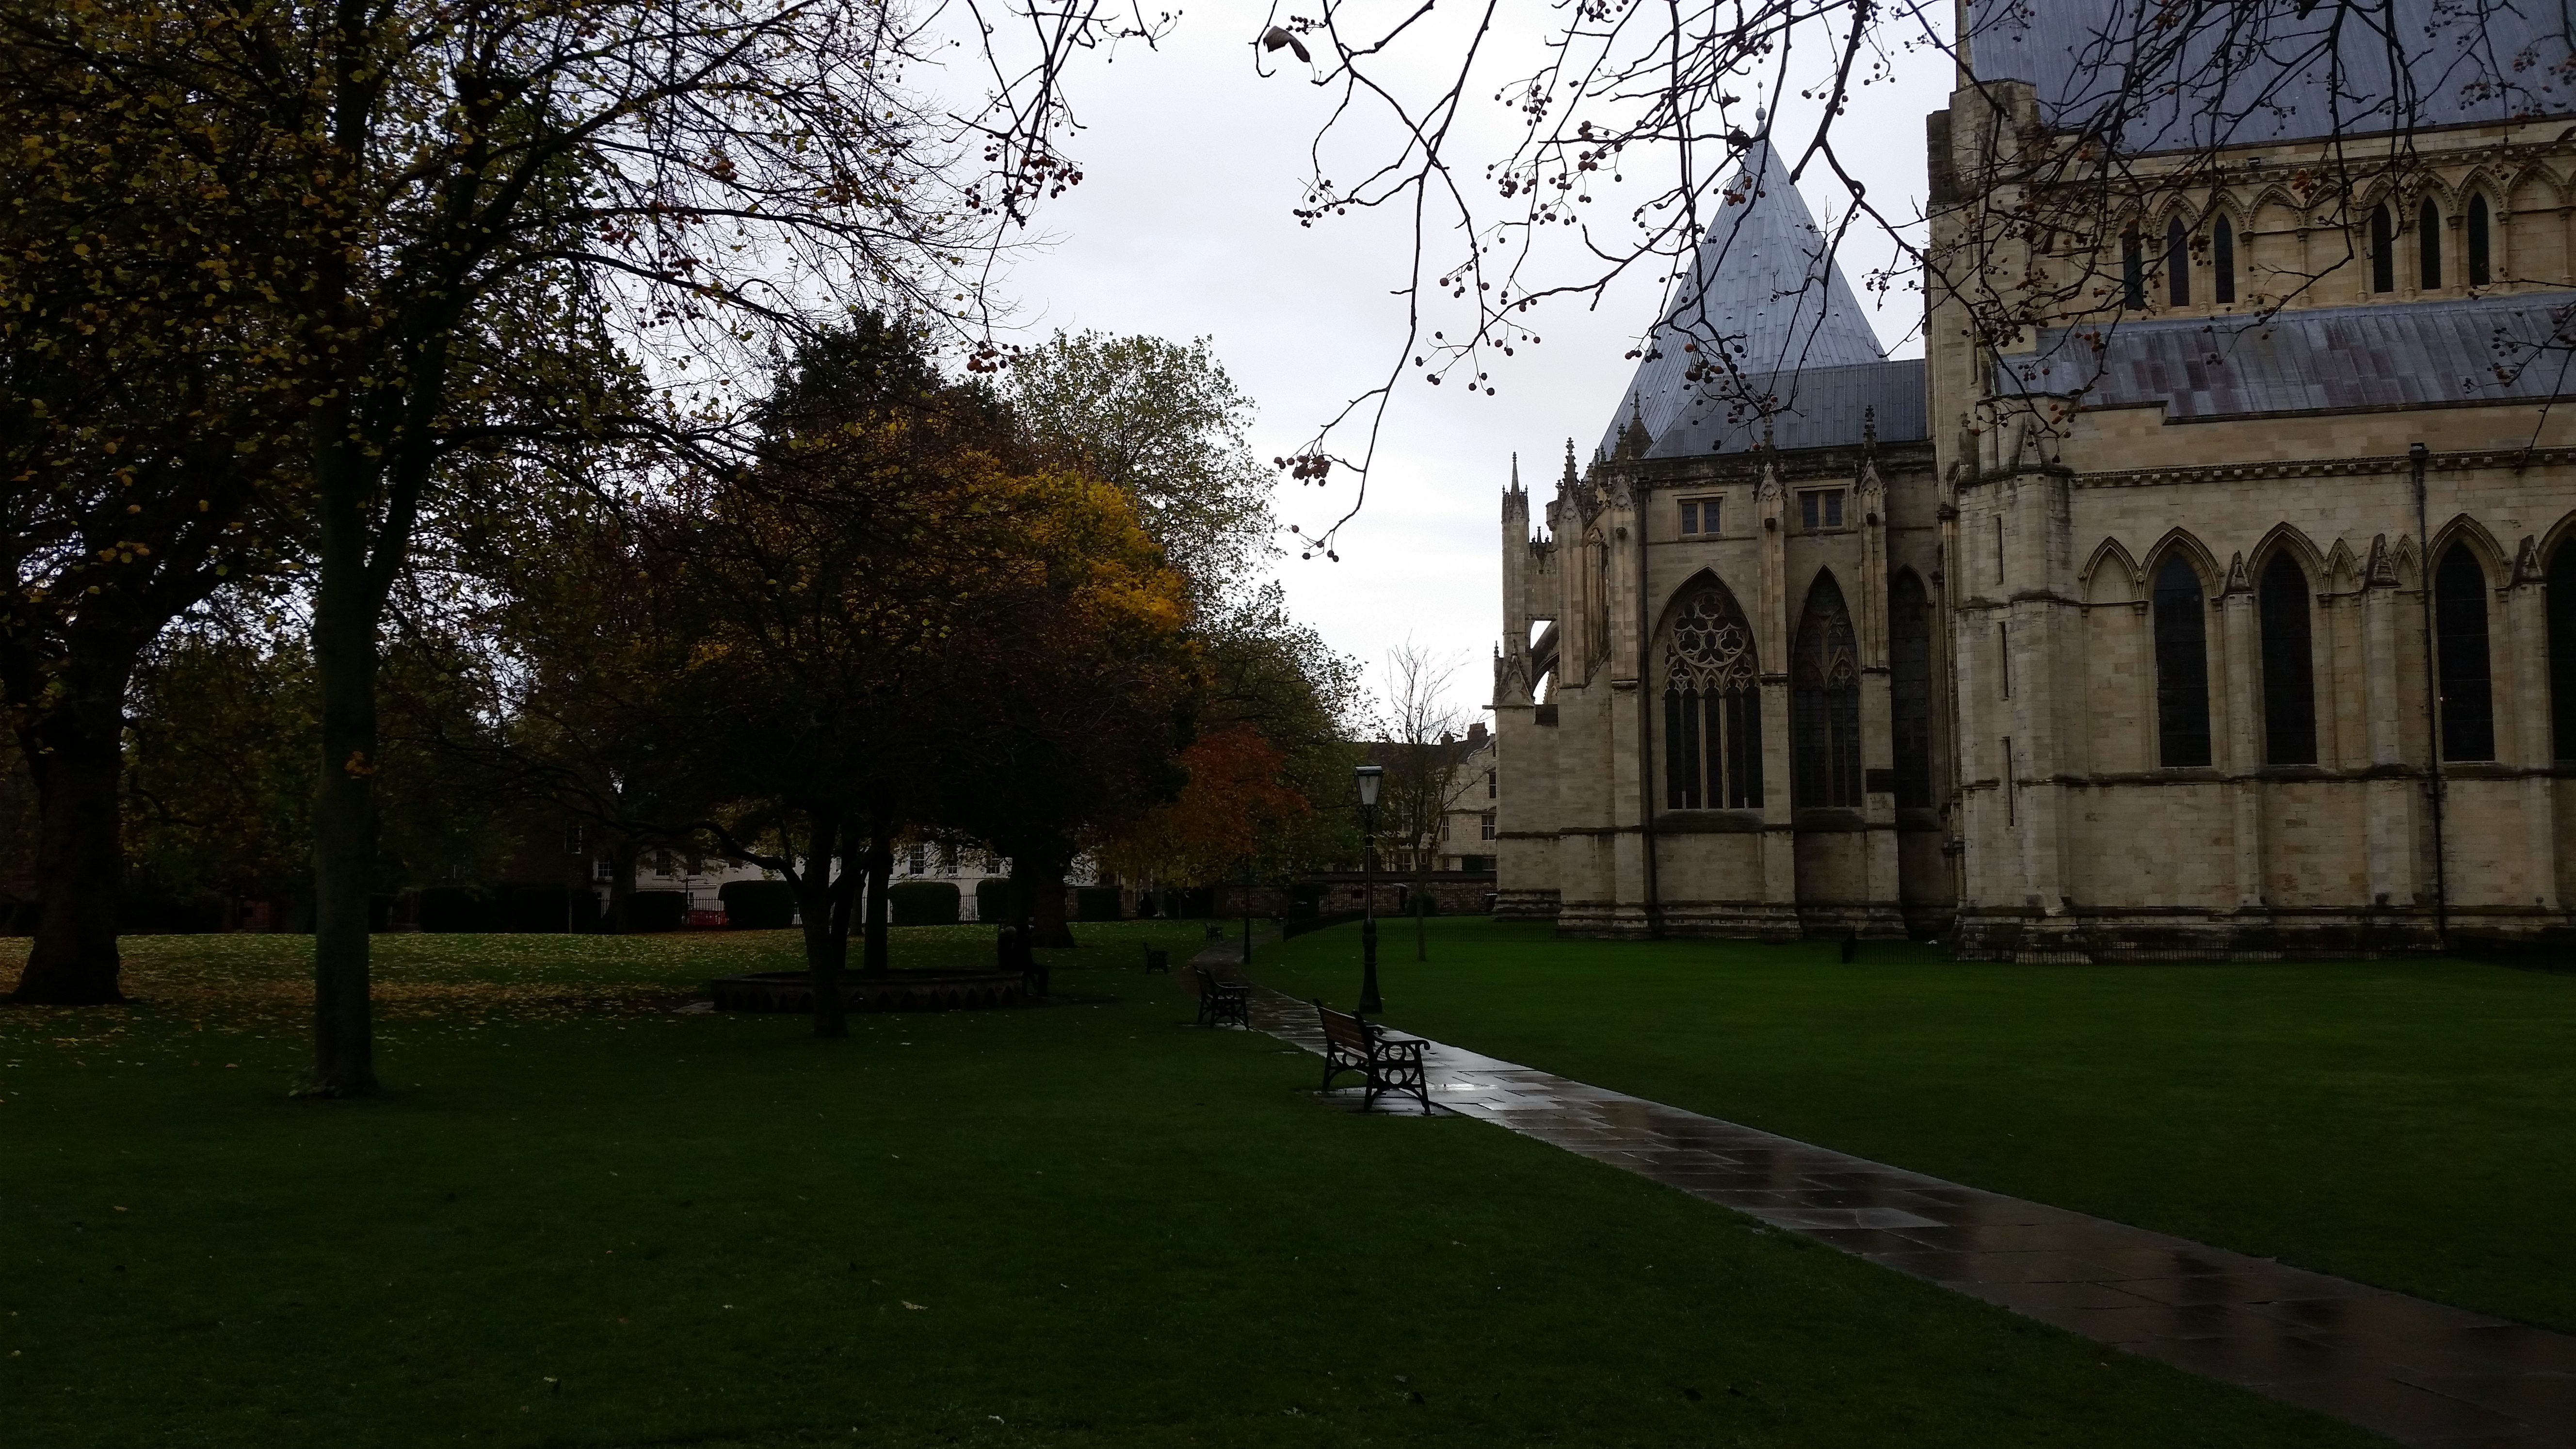 Solo explorations: A Sunday in York